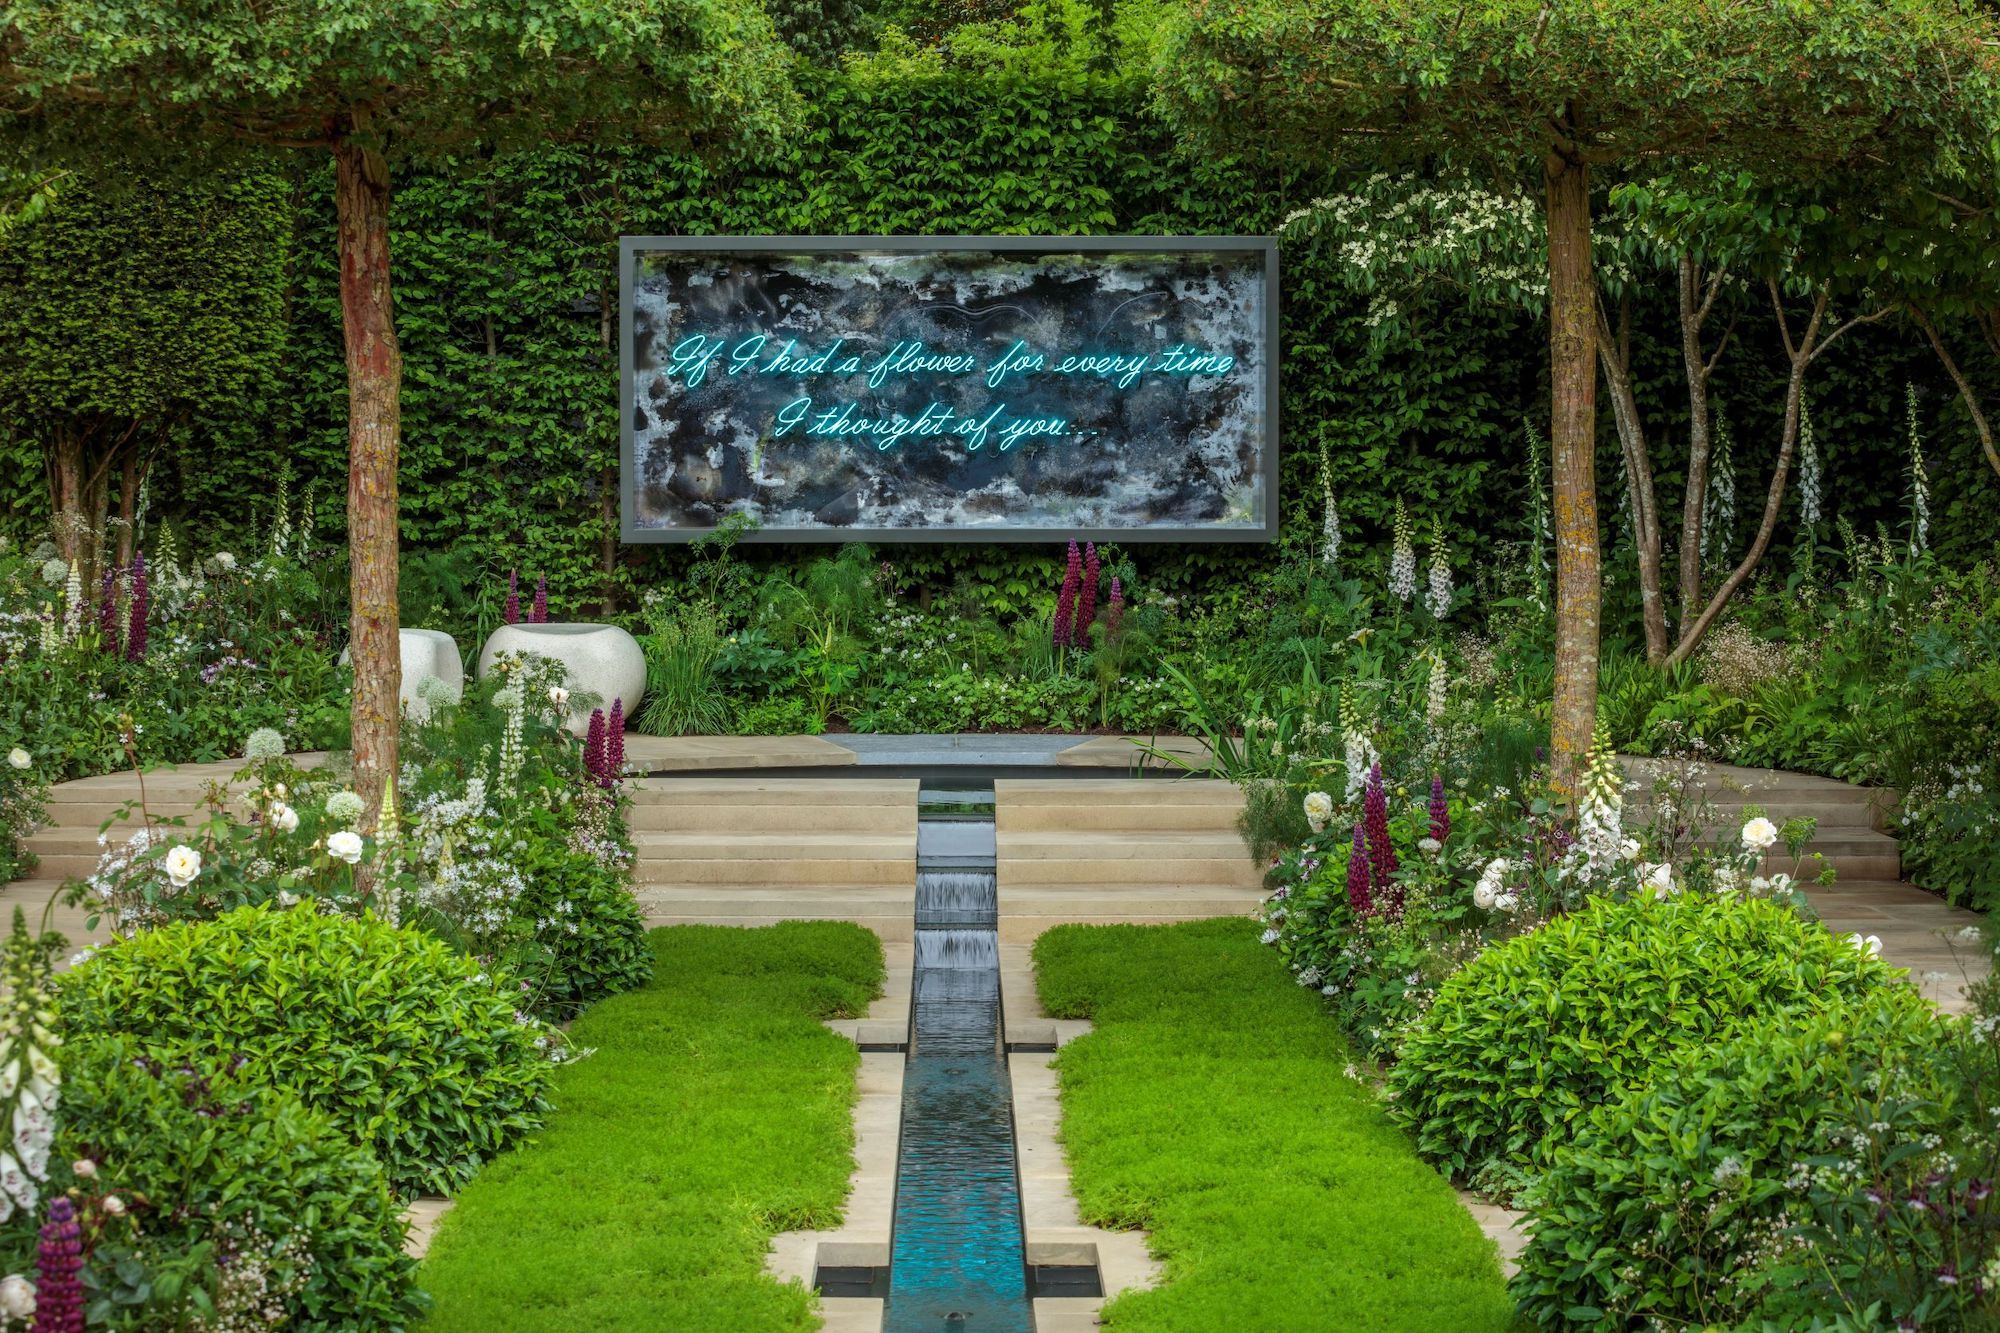 Chelsea Flower Show: The Perennial Garden 'With Love' wins People's Choice Award